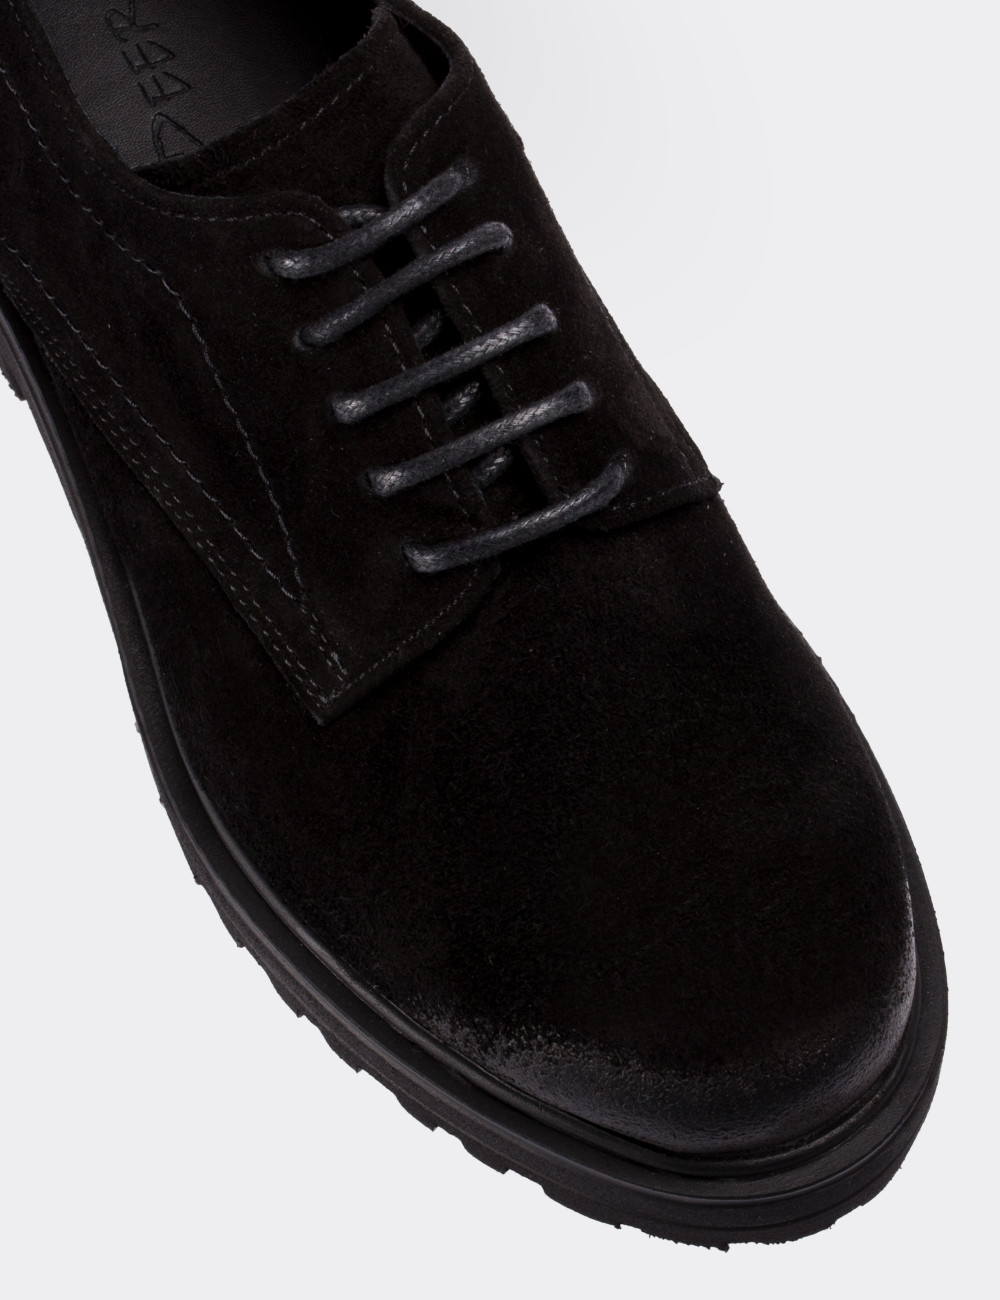 Black Suede Leather Lace-up Shoes - 01430ZSYHE05